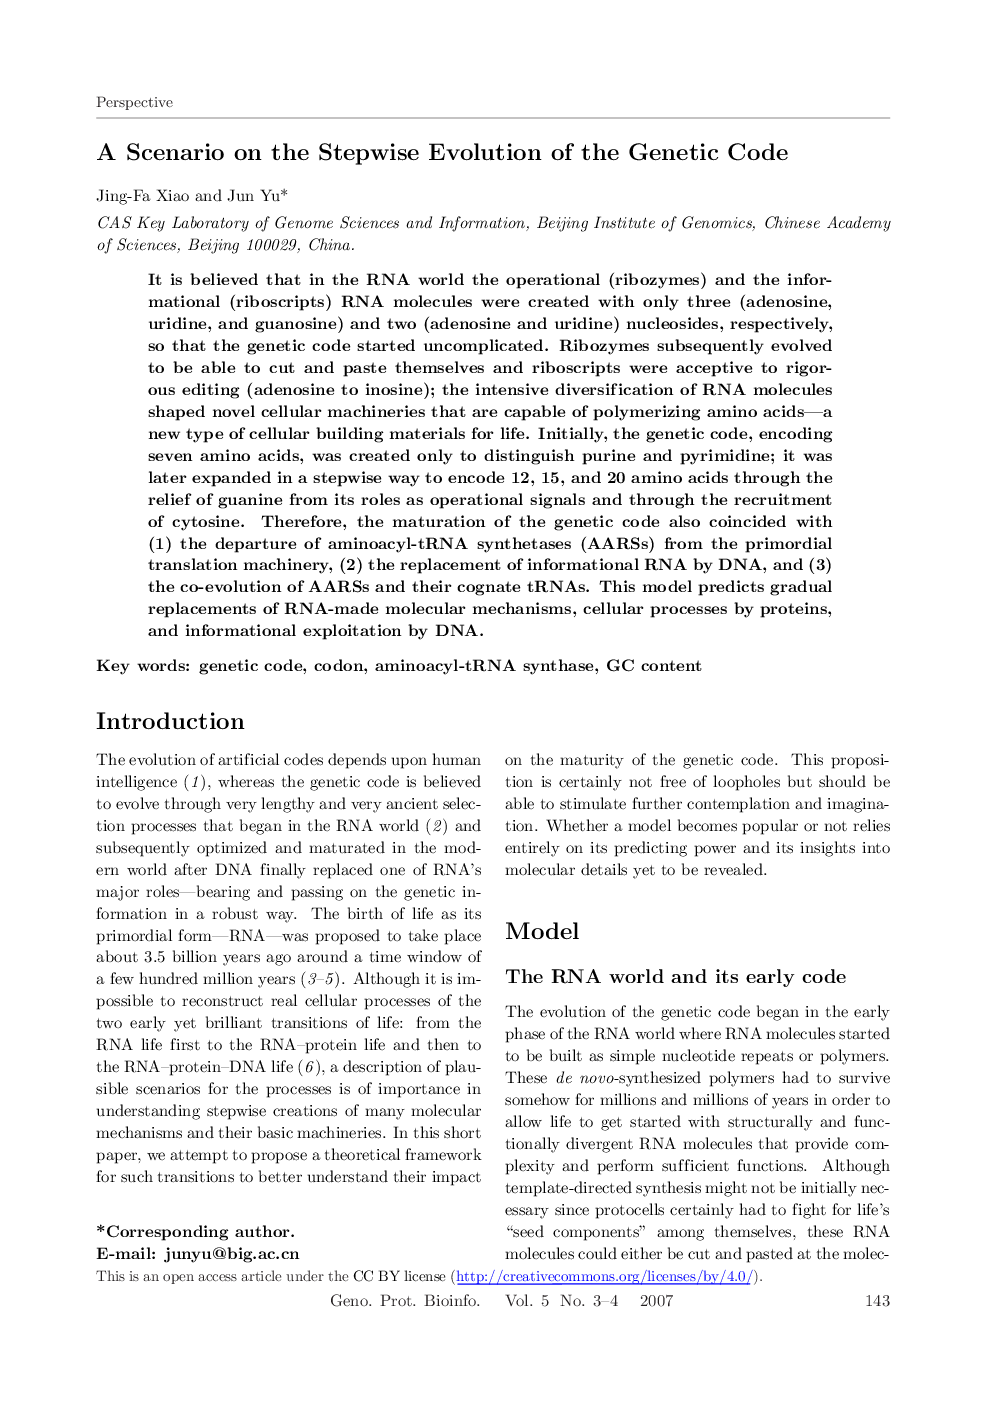 A Scenario on the Stepwise Evolution of the Genetic Code